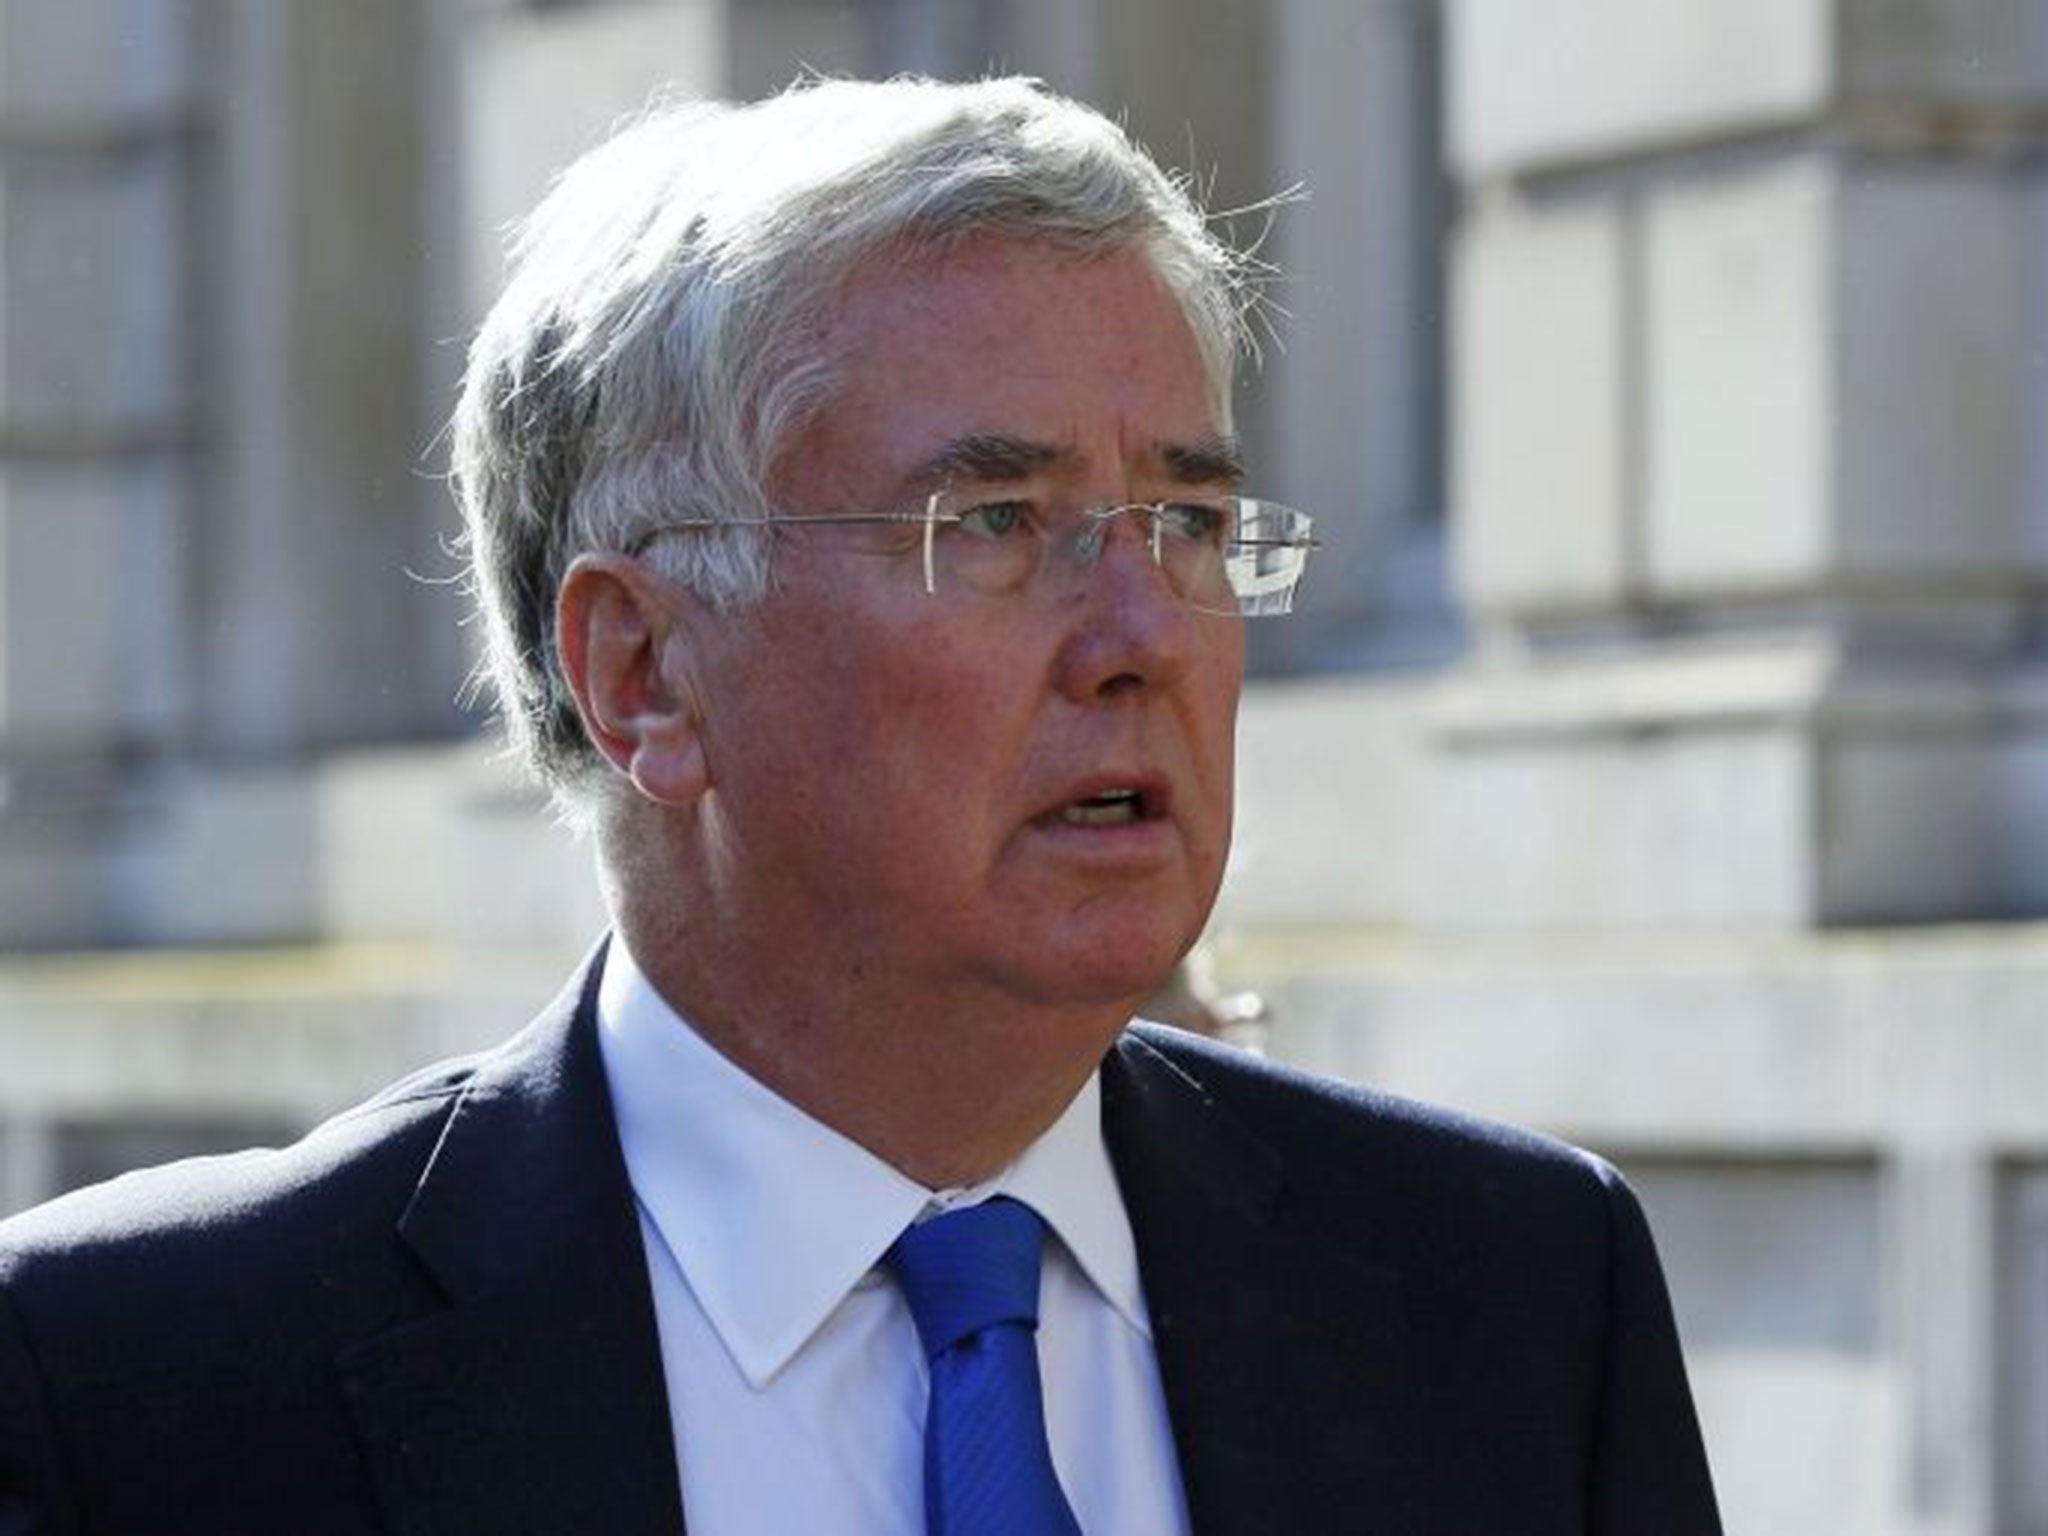 Britain's Defence Secretary Michael Fallon arriving for a Cobra meeting at the Cabinet Office on October 8th